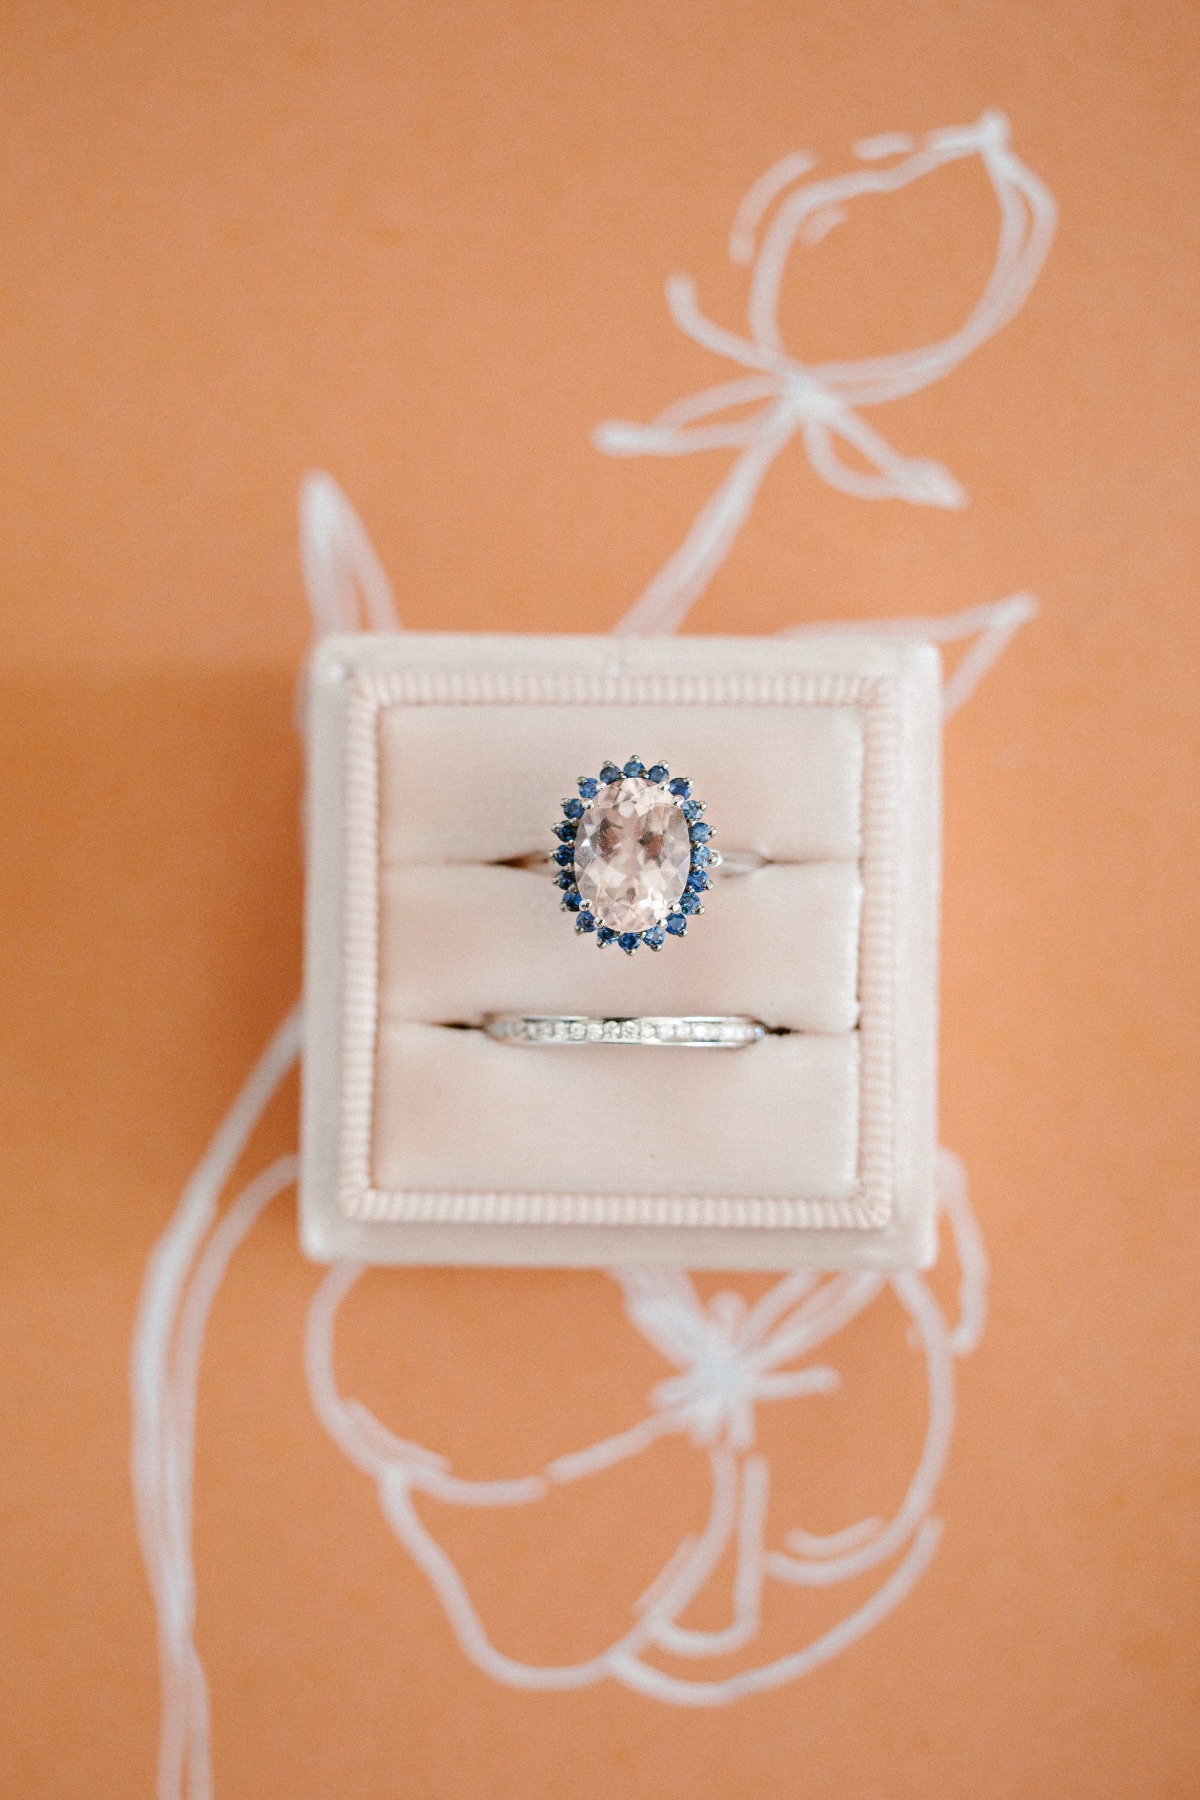 flat lay styling idea for wedding ring